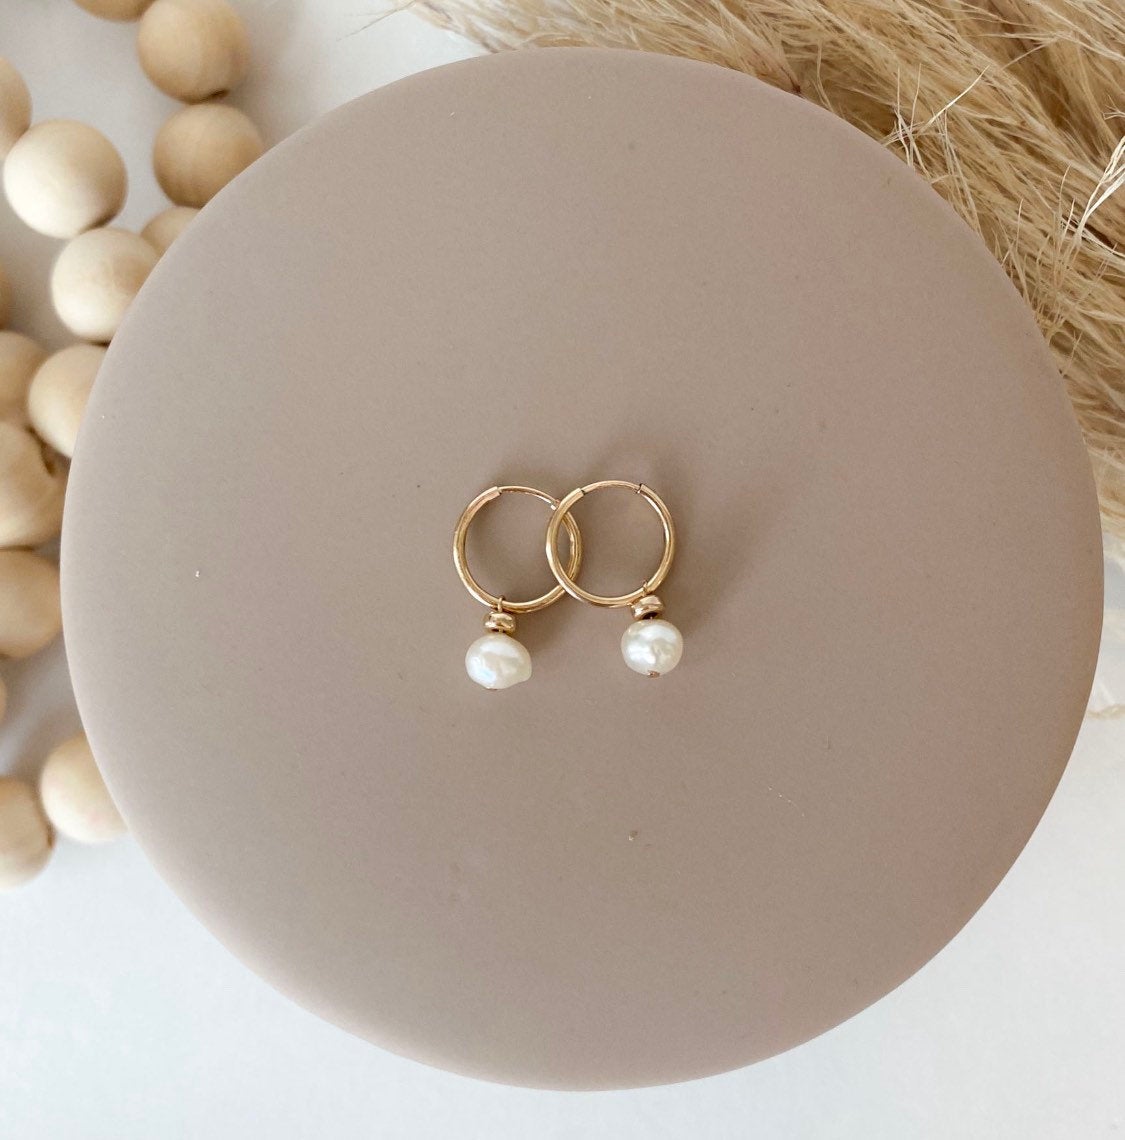 Small 12mm hoops with pearl - huggies - high quality - hypoallergenic - good for sensitive ears - everyday earrings - endless hoops - pair